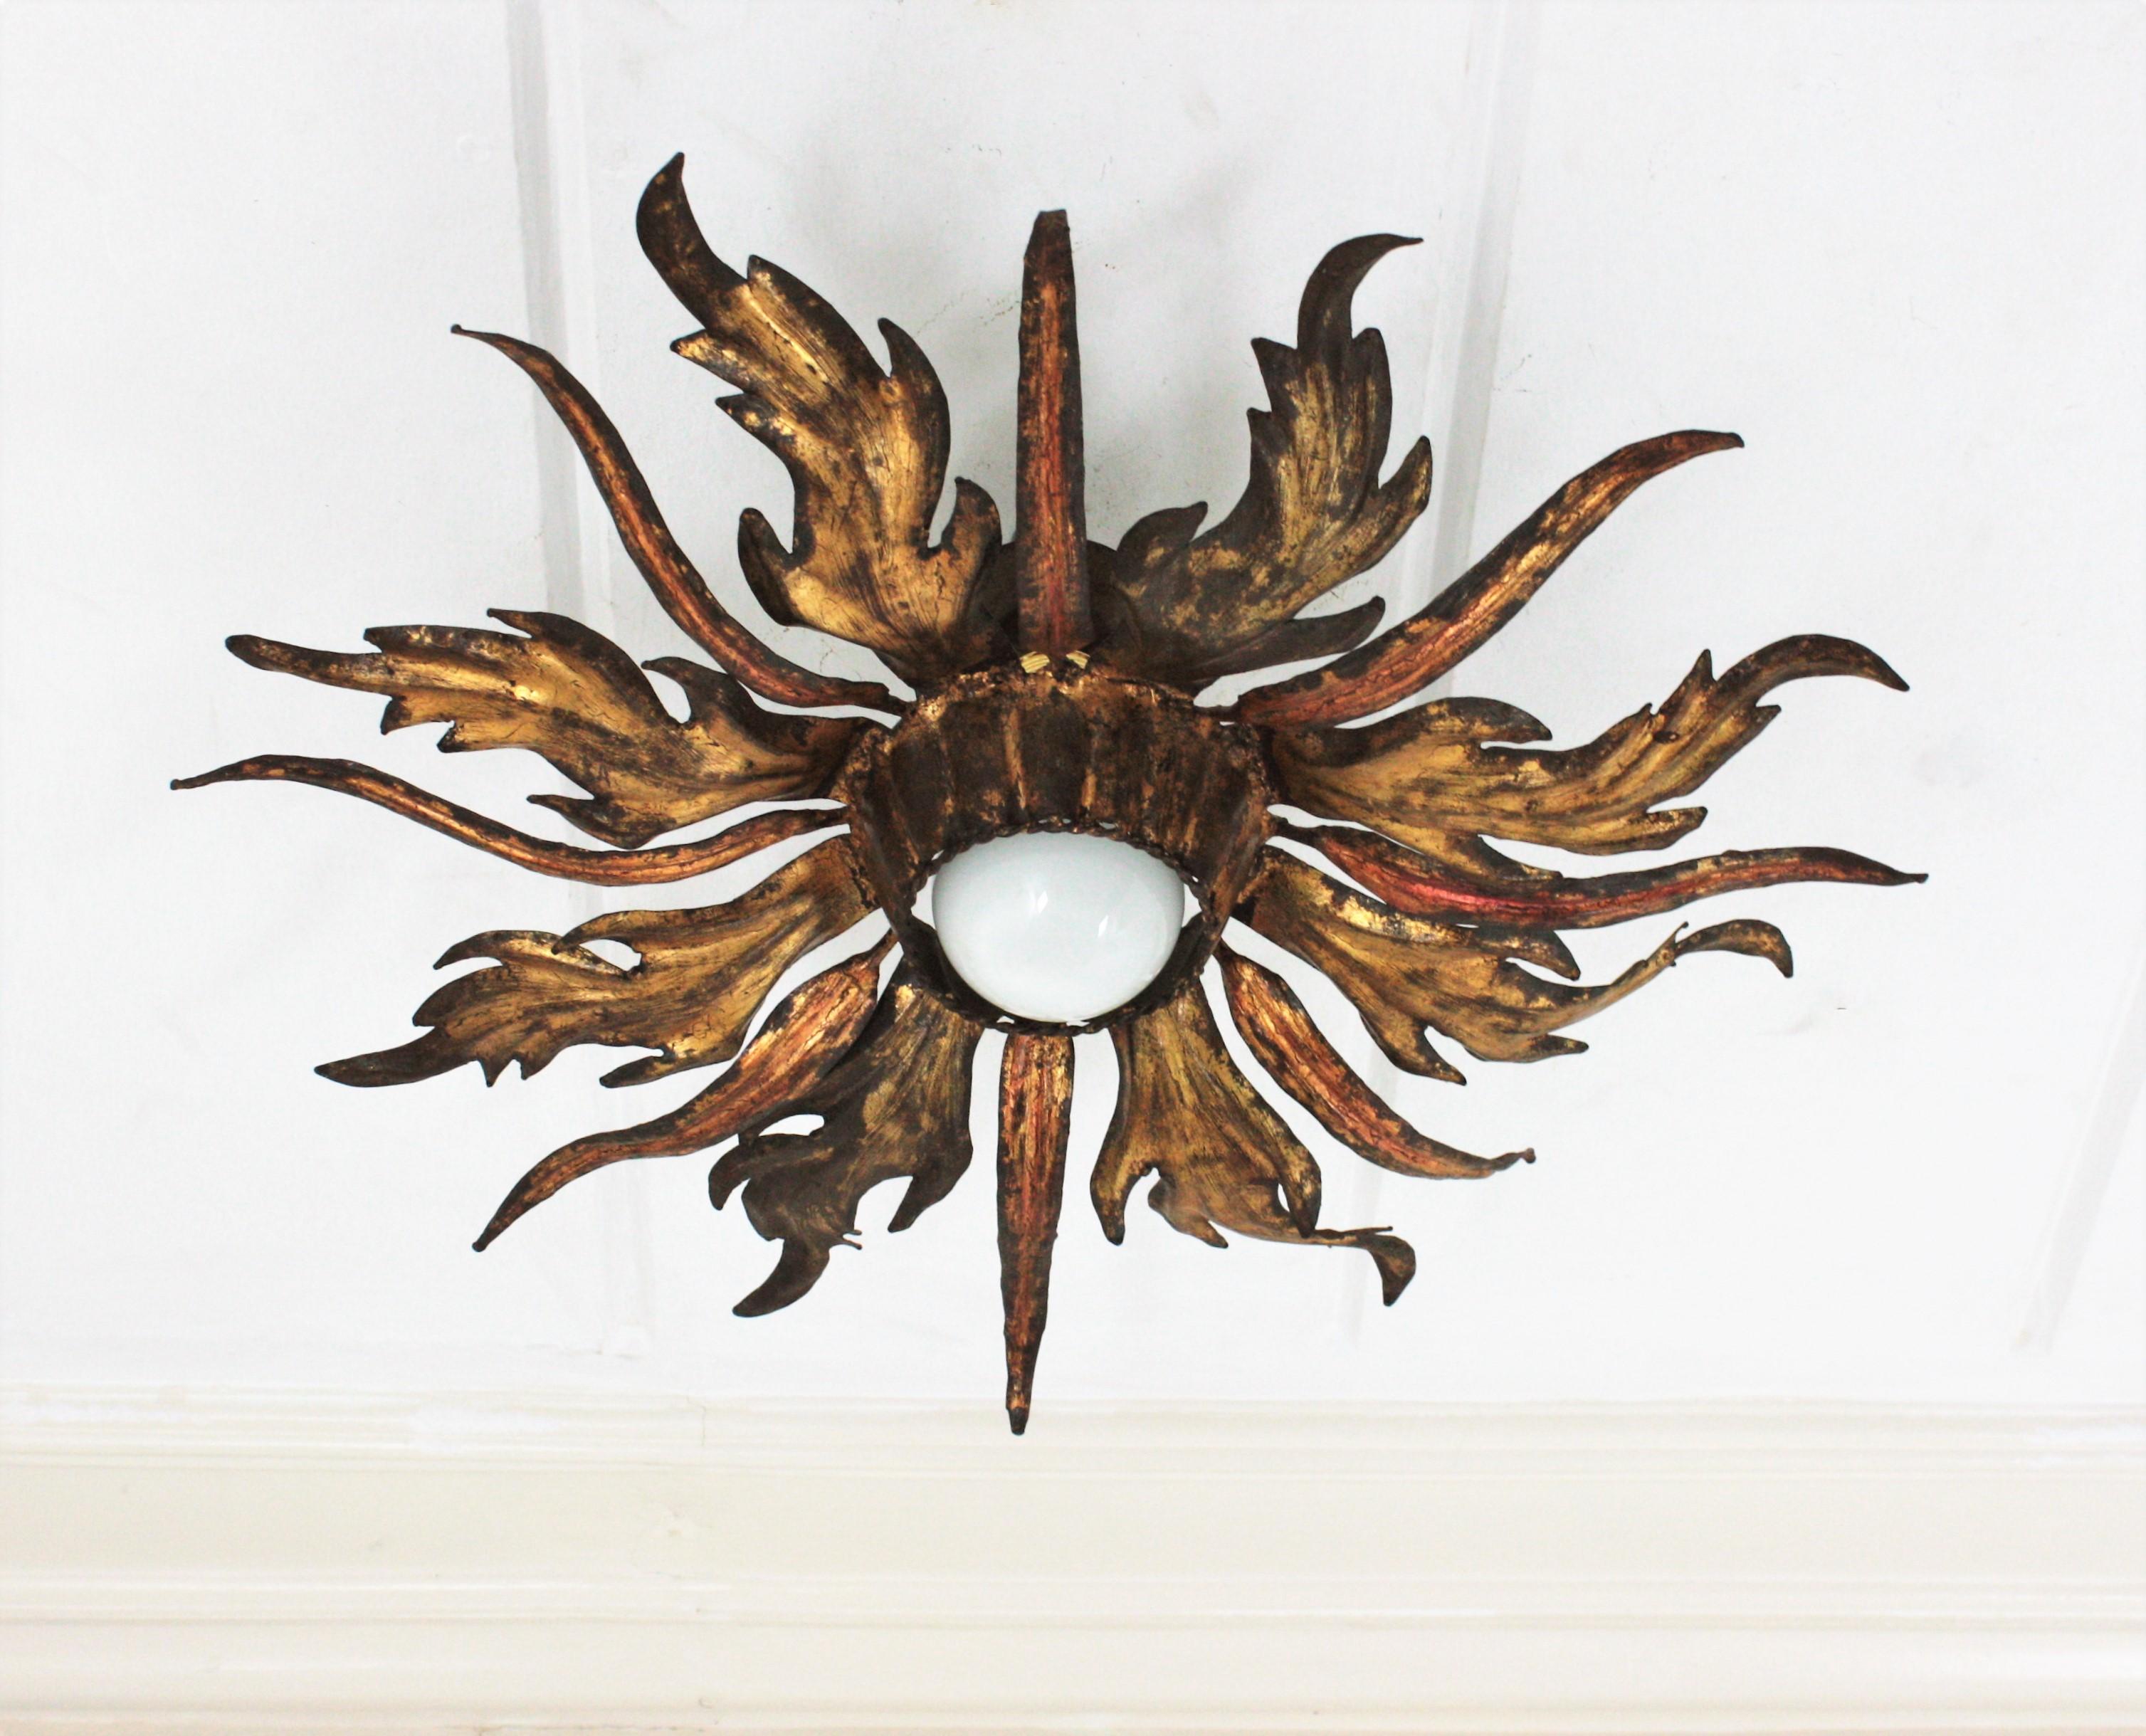 Hand-Crafted French Leafed Copper & Gilt Iron Sunburst Ceiling Light Fixture, 1940s